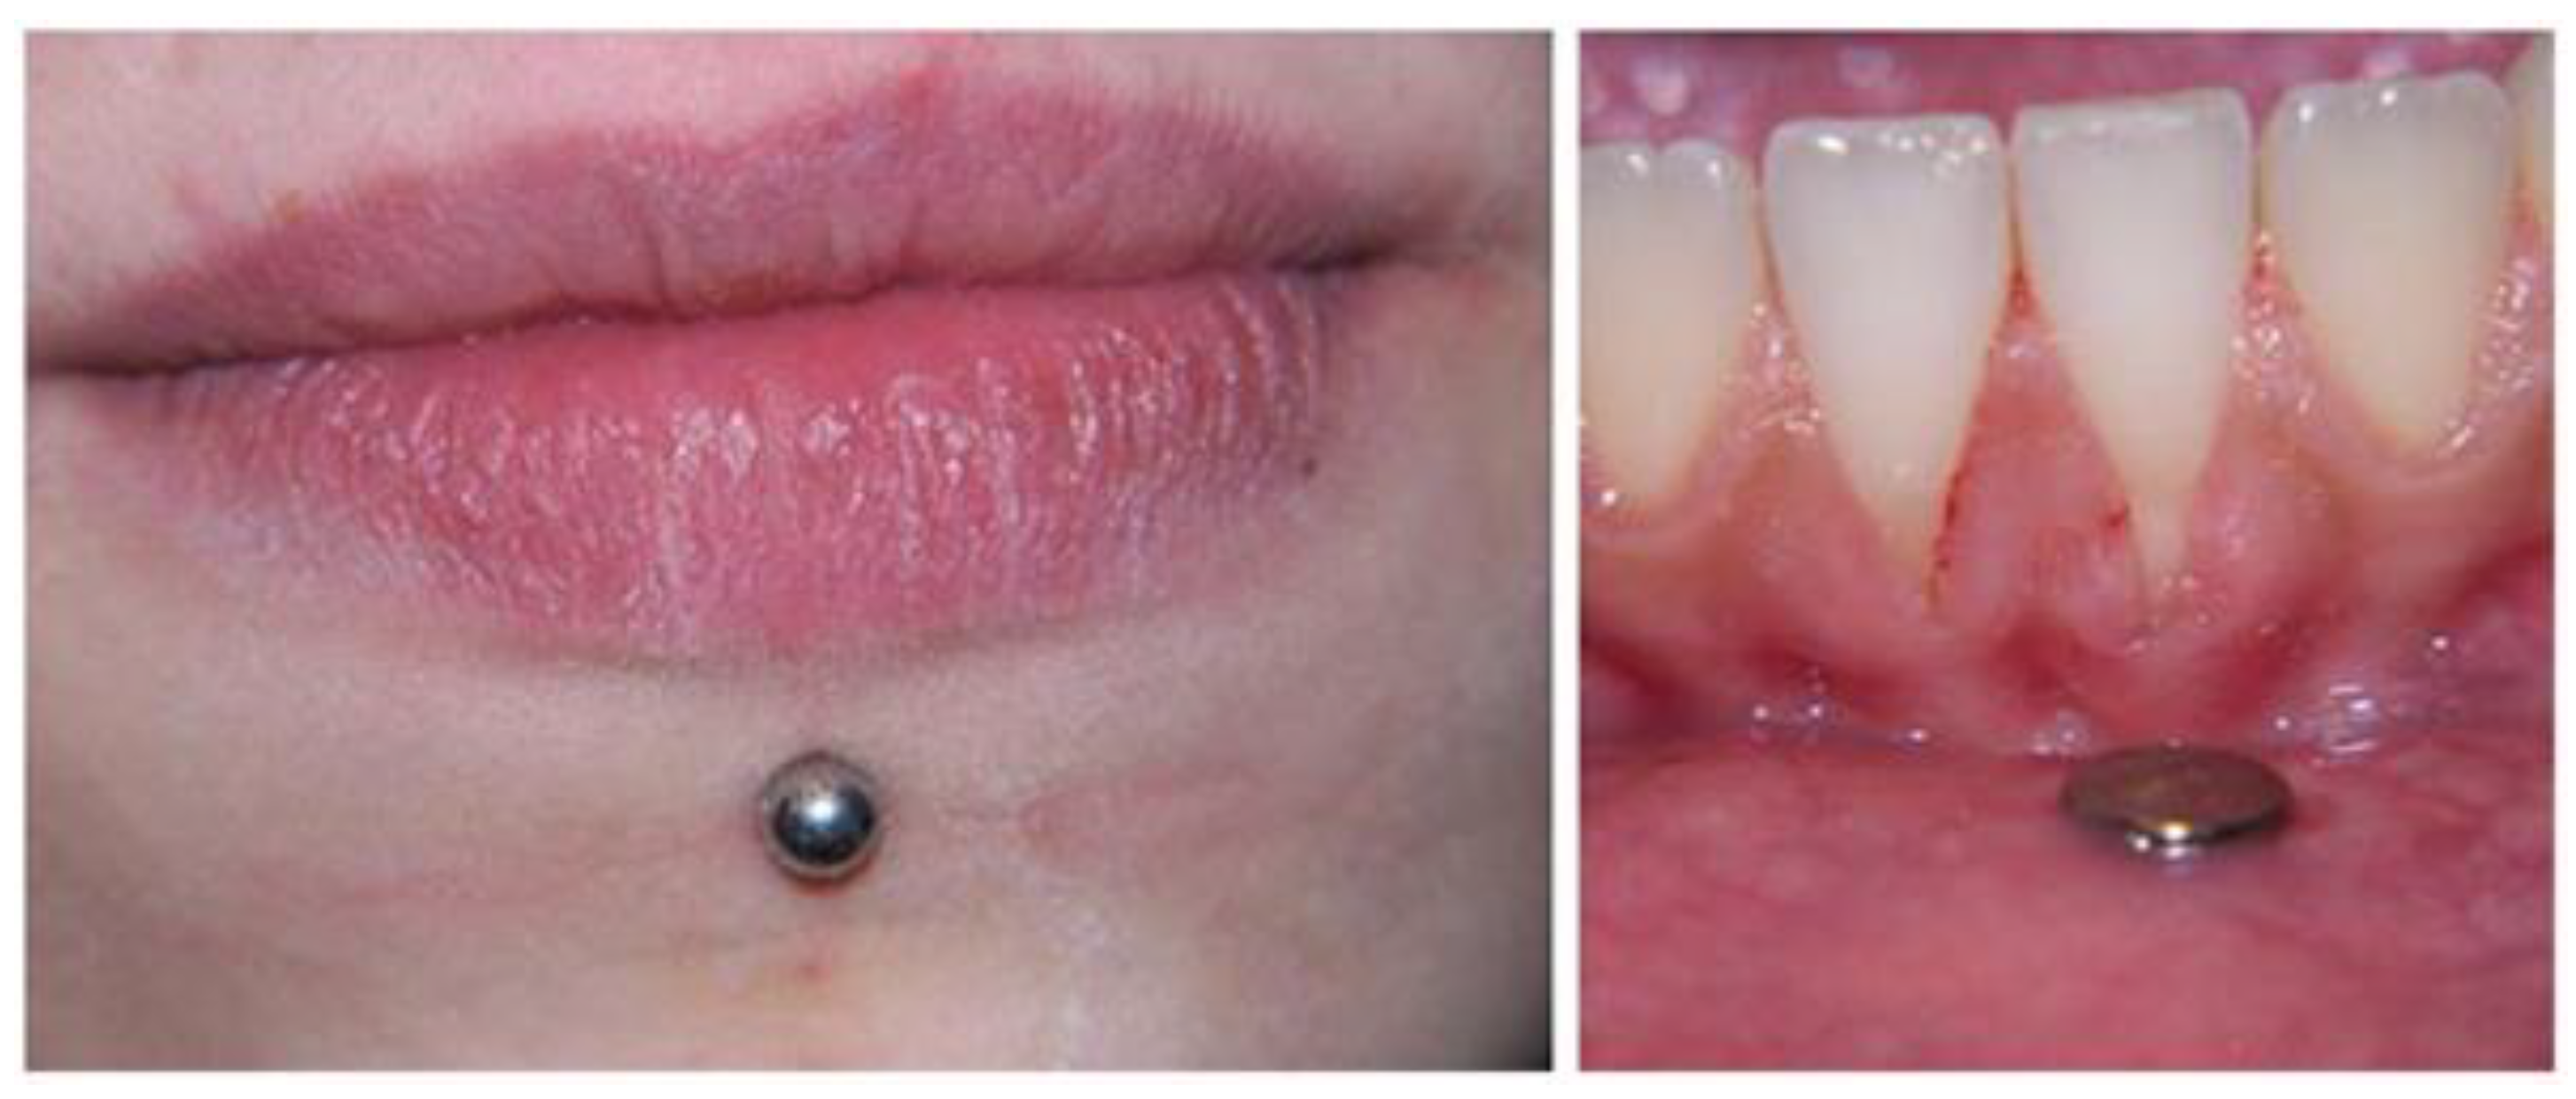 IJERPH | Free Full-Text | Oral Piercing: A Pretty Risk—A Scoping  Review of Local and Systemic Complications of This Current Widespread  Fashion